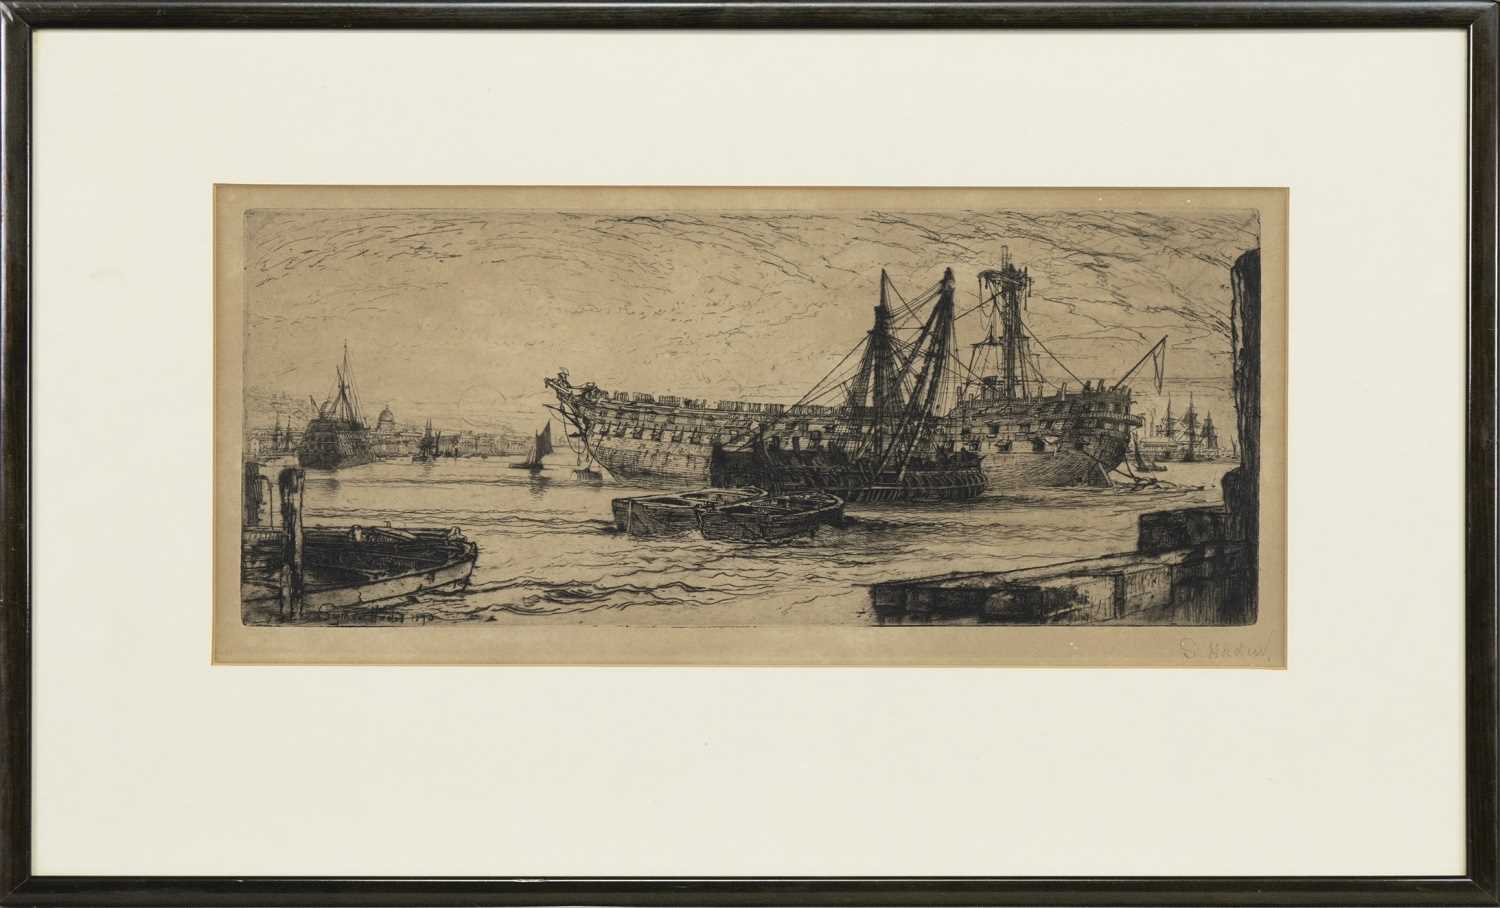 BREAKING UP THE AGAMEMNON, AN ETCHING BY SIR FRANCIS SEYMOUR HADEN